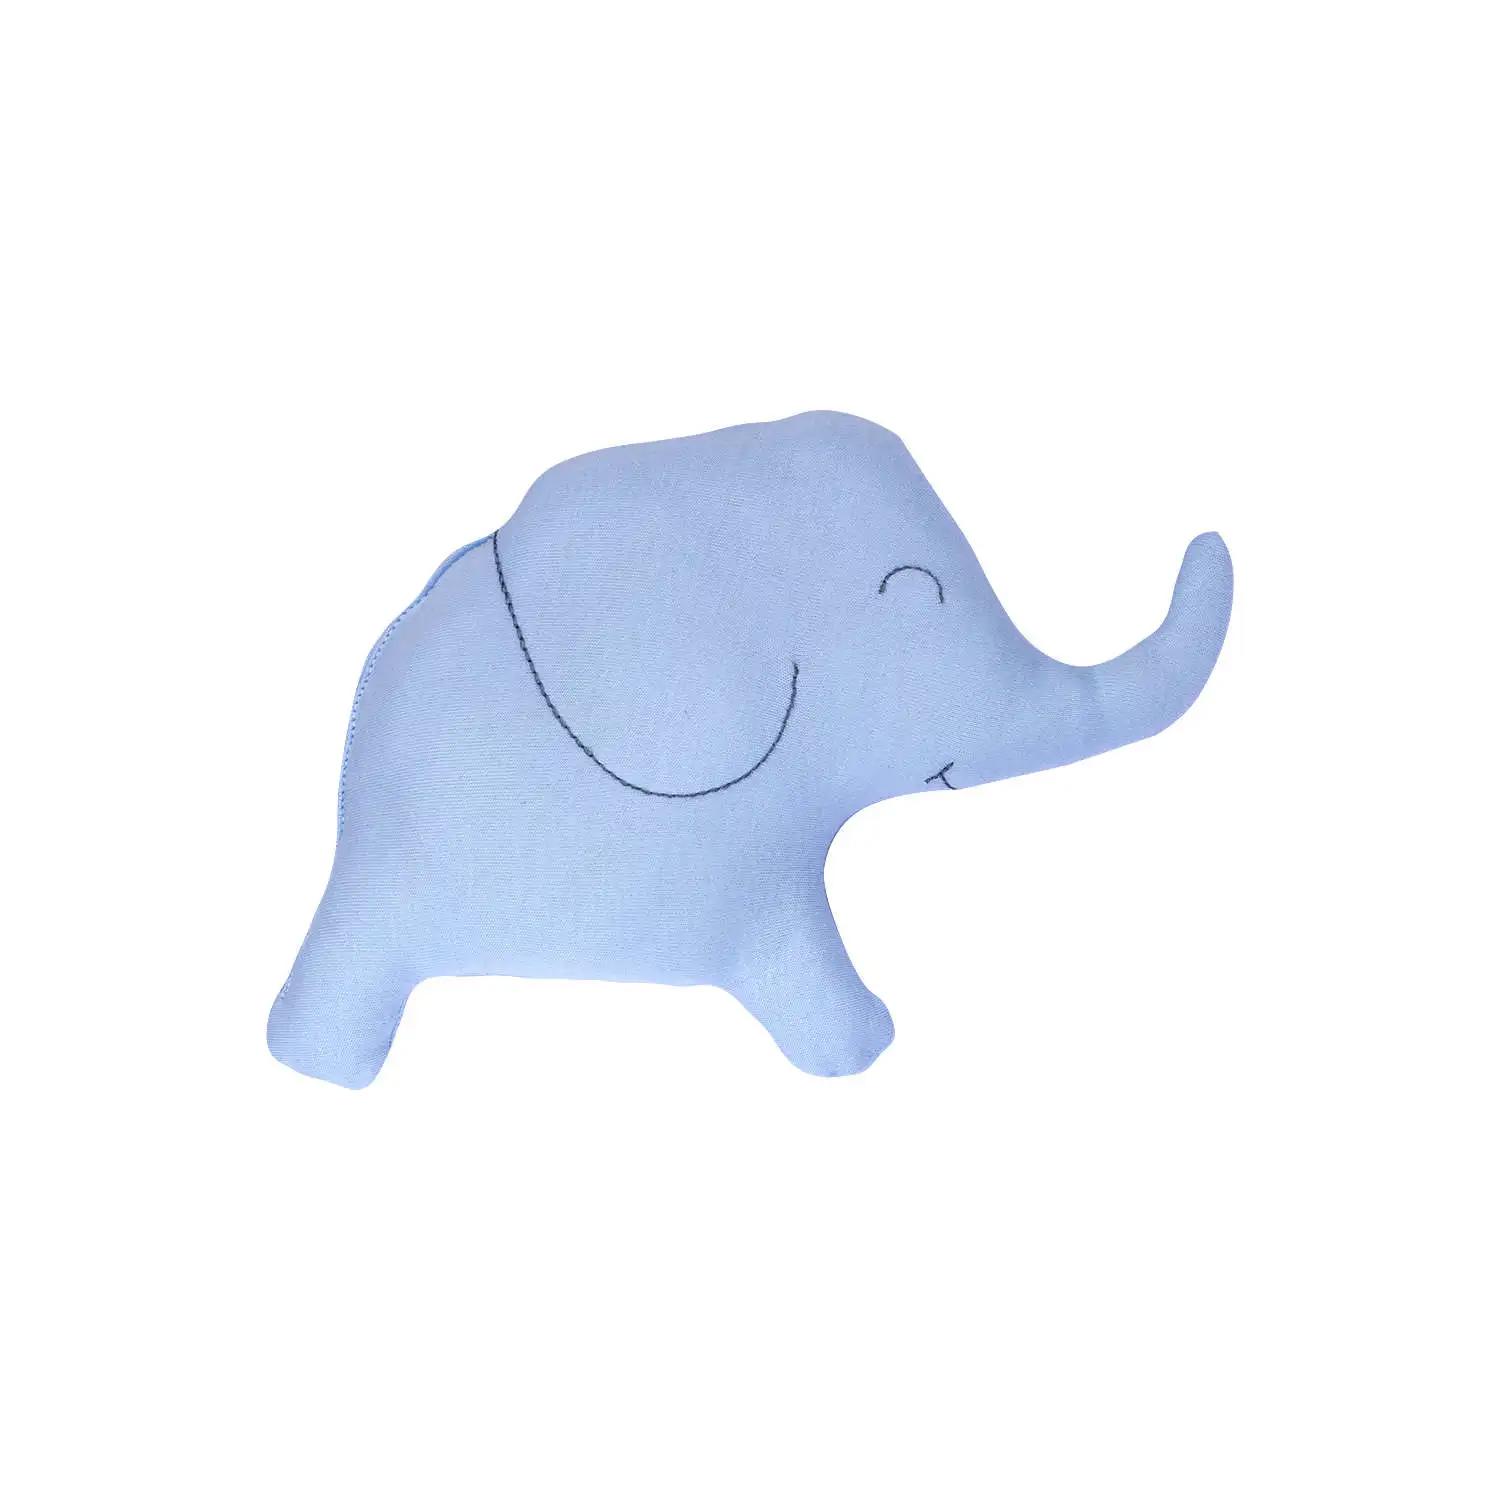 Sarebaby %100 Natural Cotton Cute Blue Elephant Serial Coming Home 10 Pieces Set With Toy Gift